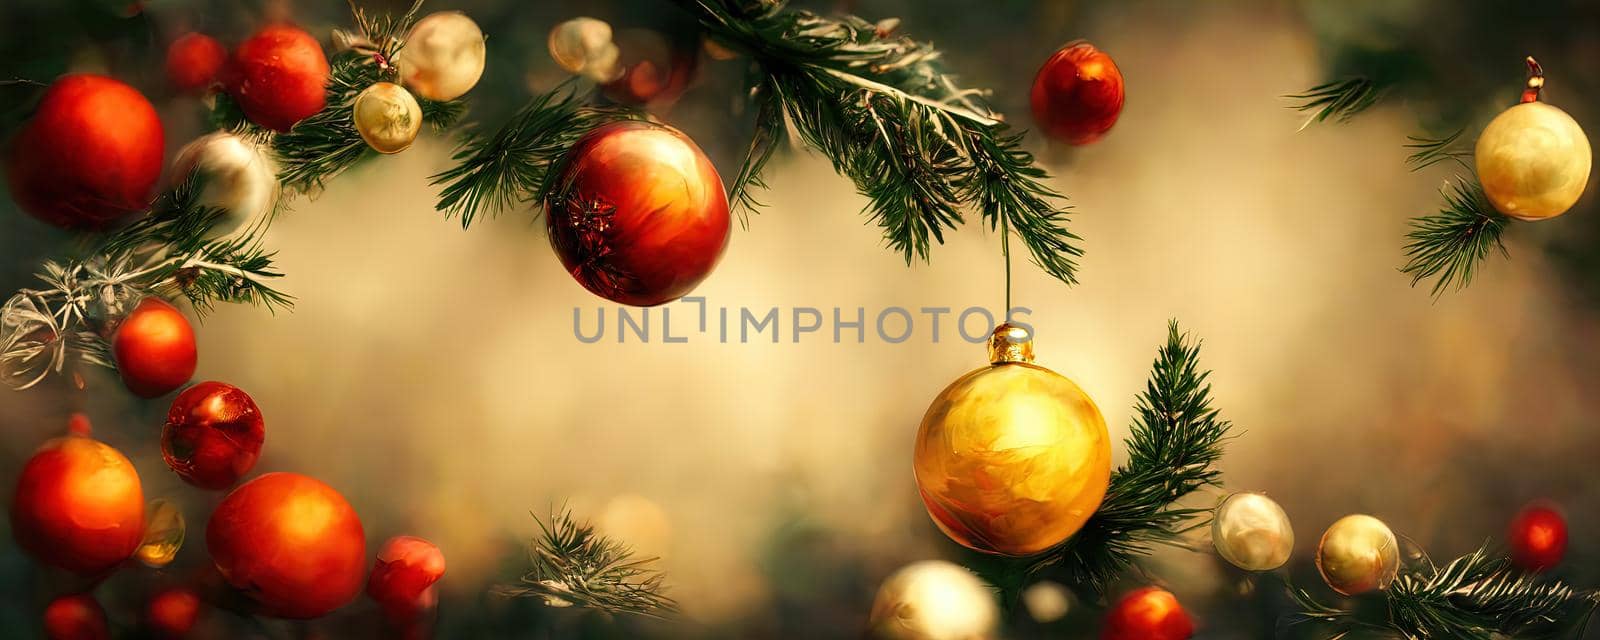 New Year's warm background with copy space in warm colors with Christmas decorations and Christmas tree branches by TRMK